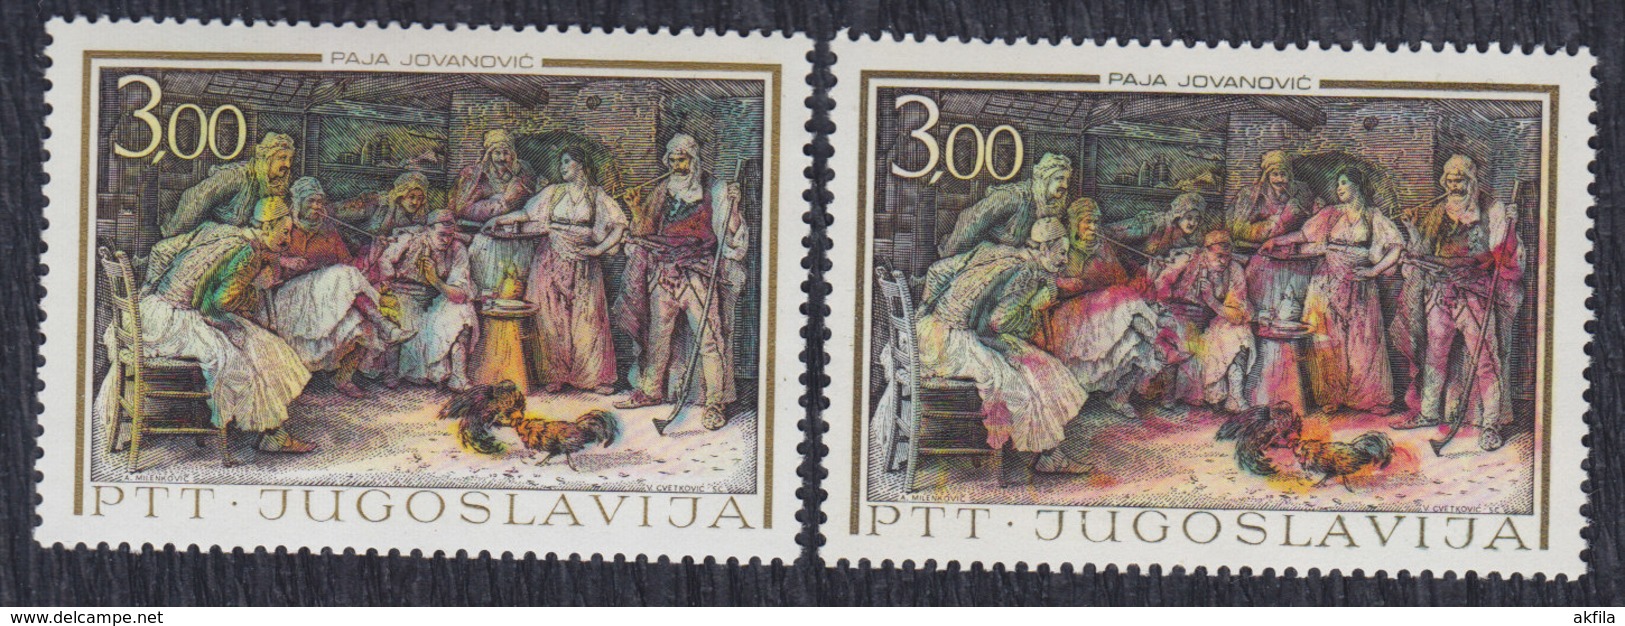 Yugoslavia 1967 Art, Error - Difference In Color, MNH (**) Michel 1260 - Imperforates, Proofs & Errors